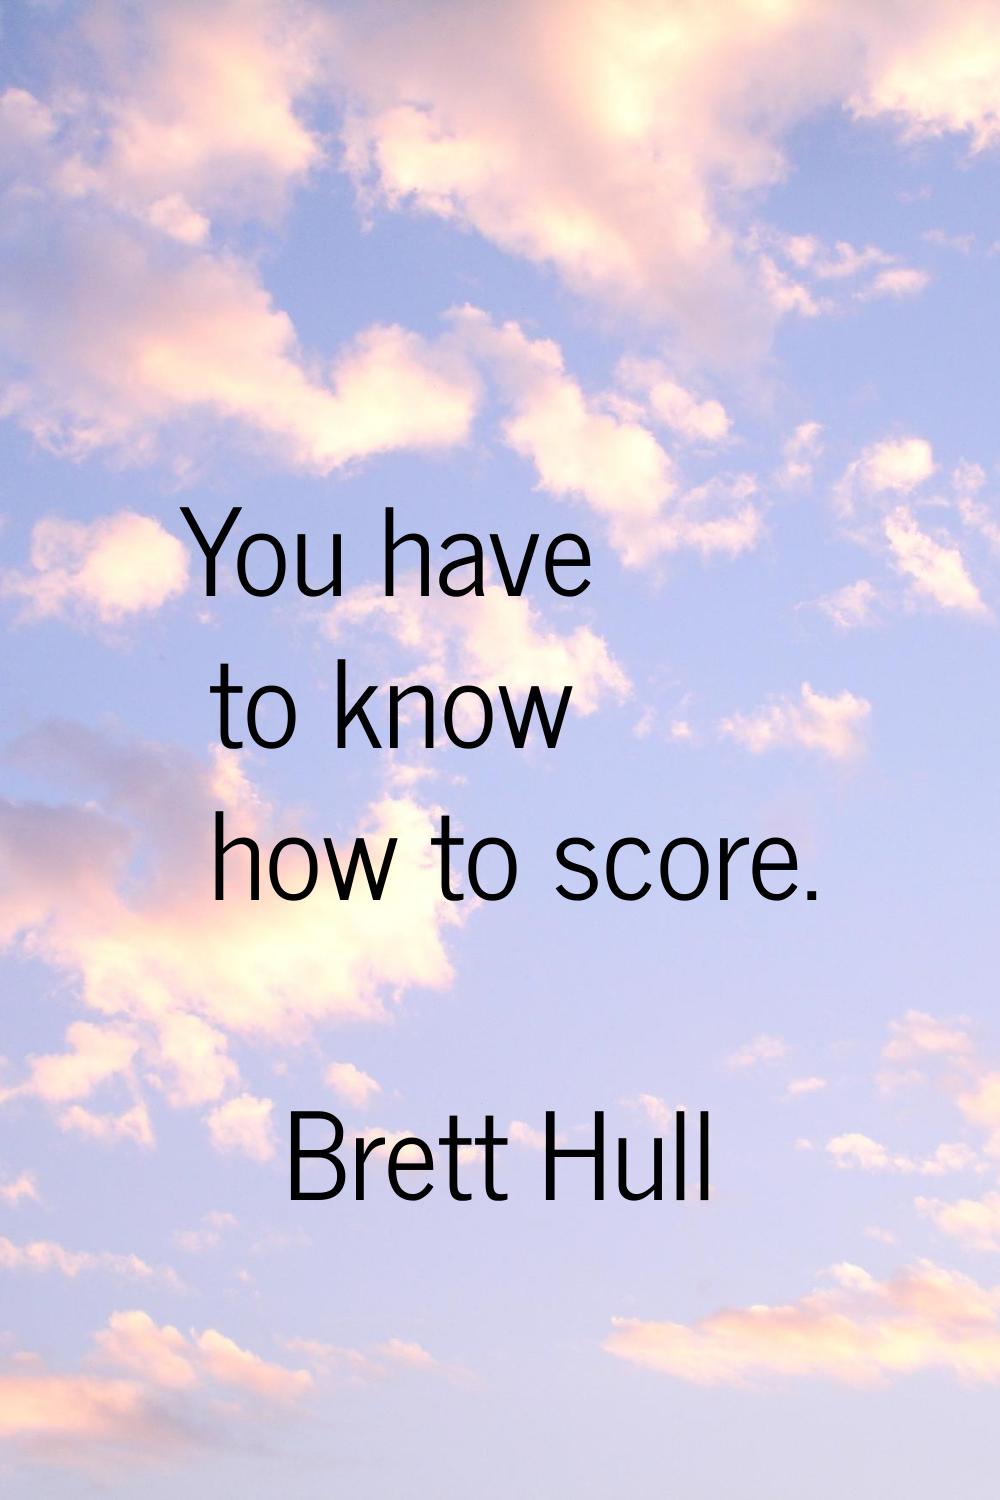 You have to know how to score.